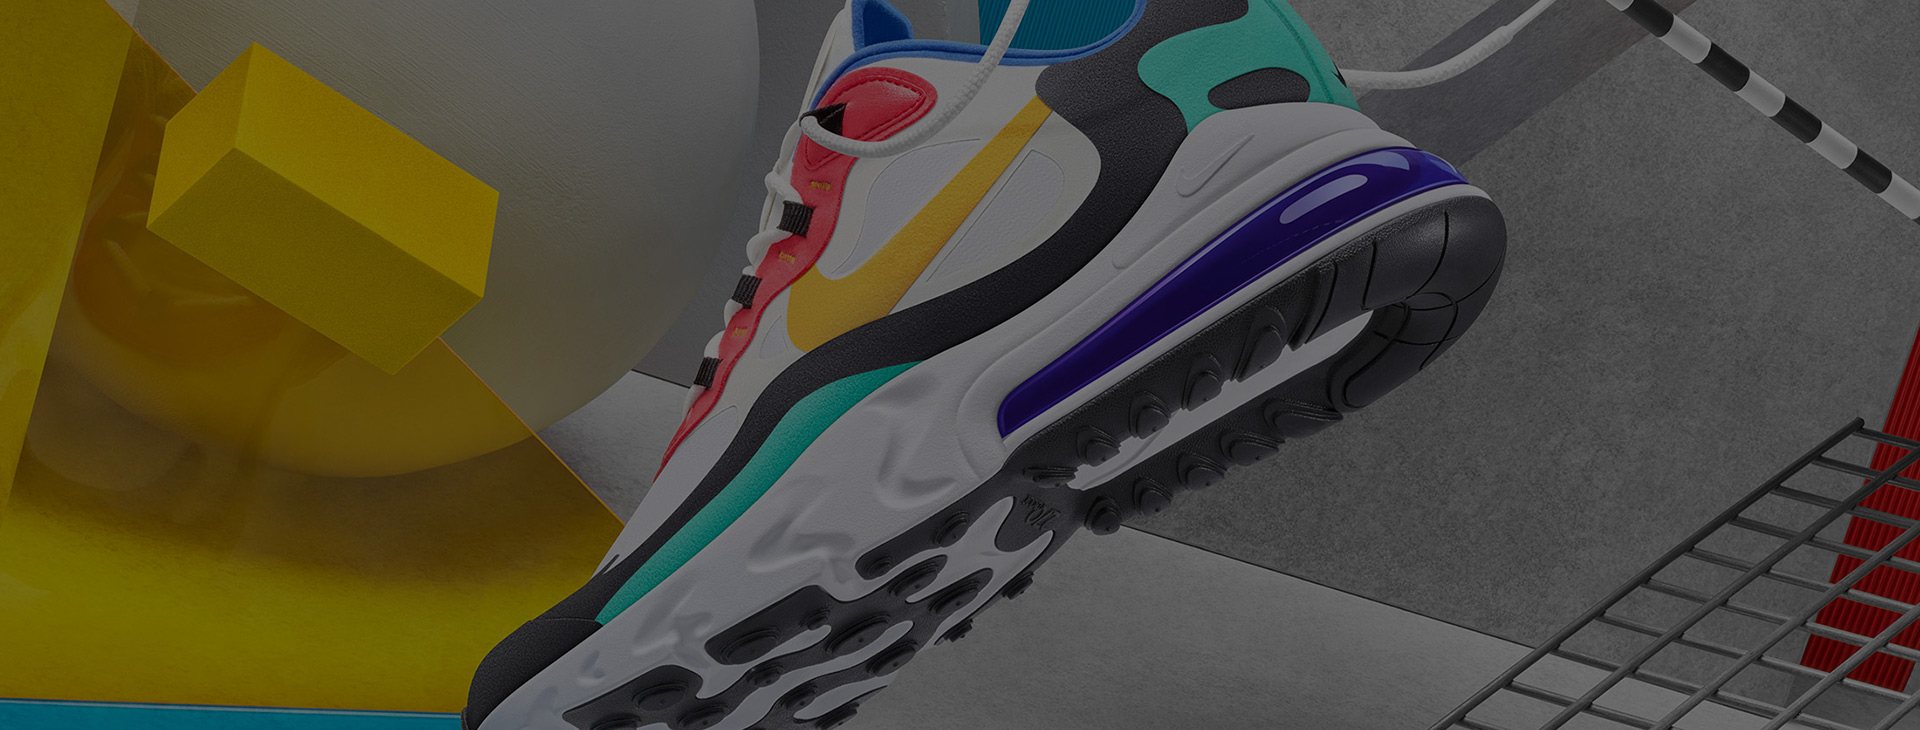 air max 27 react release dates 219